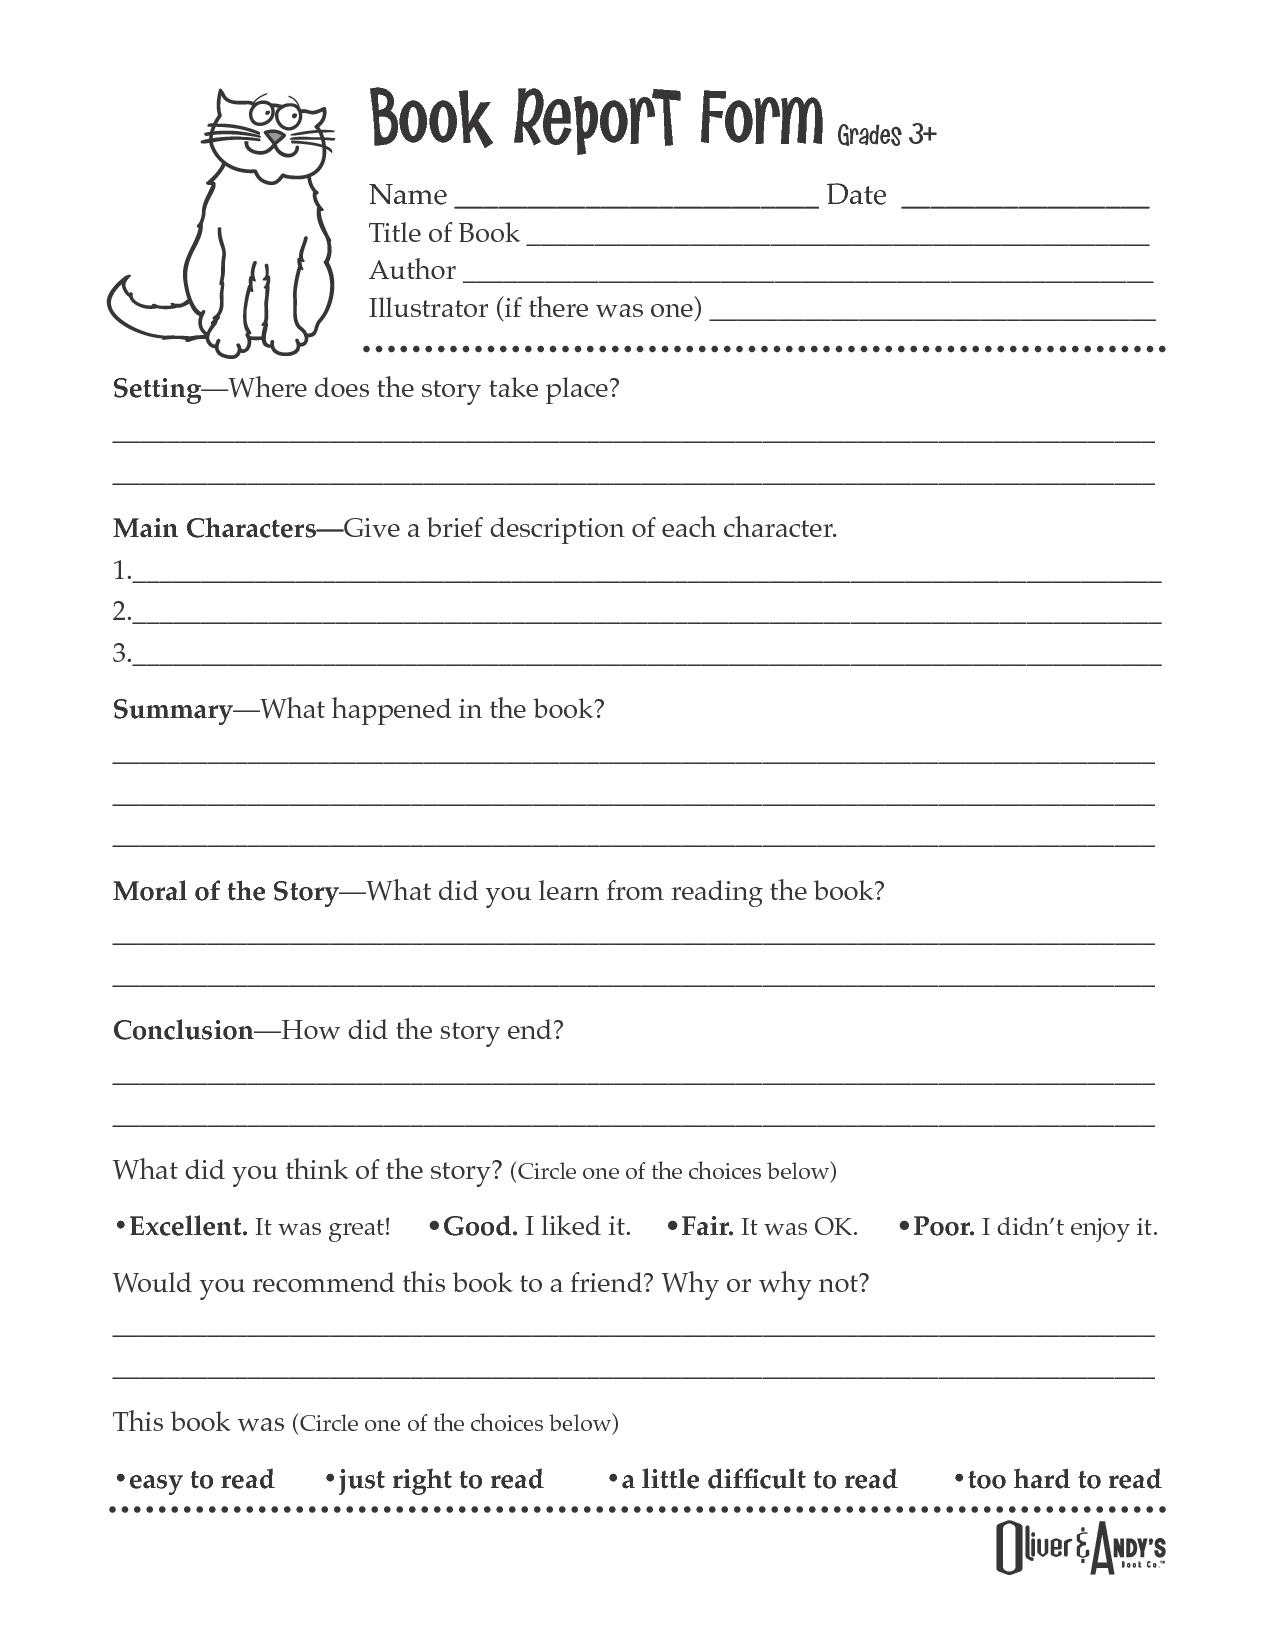 Second Grade Book Report Template  Book Report Form Grades pertaining to Middle School Book Report Template